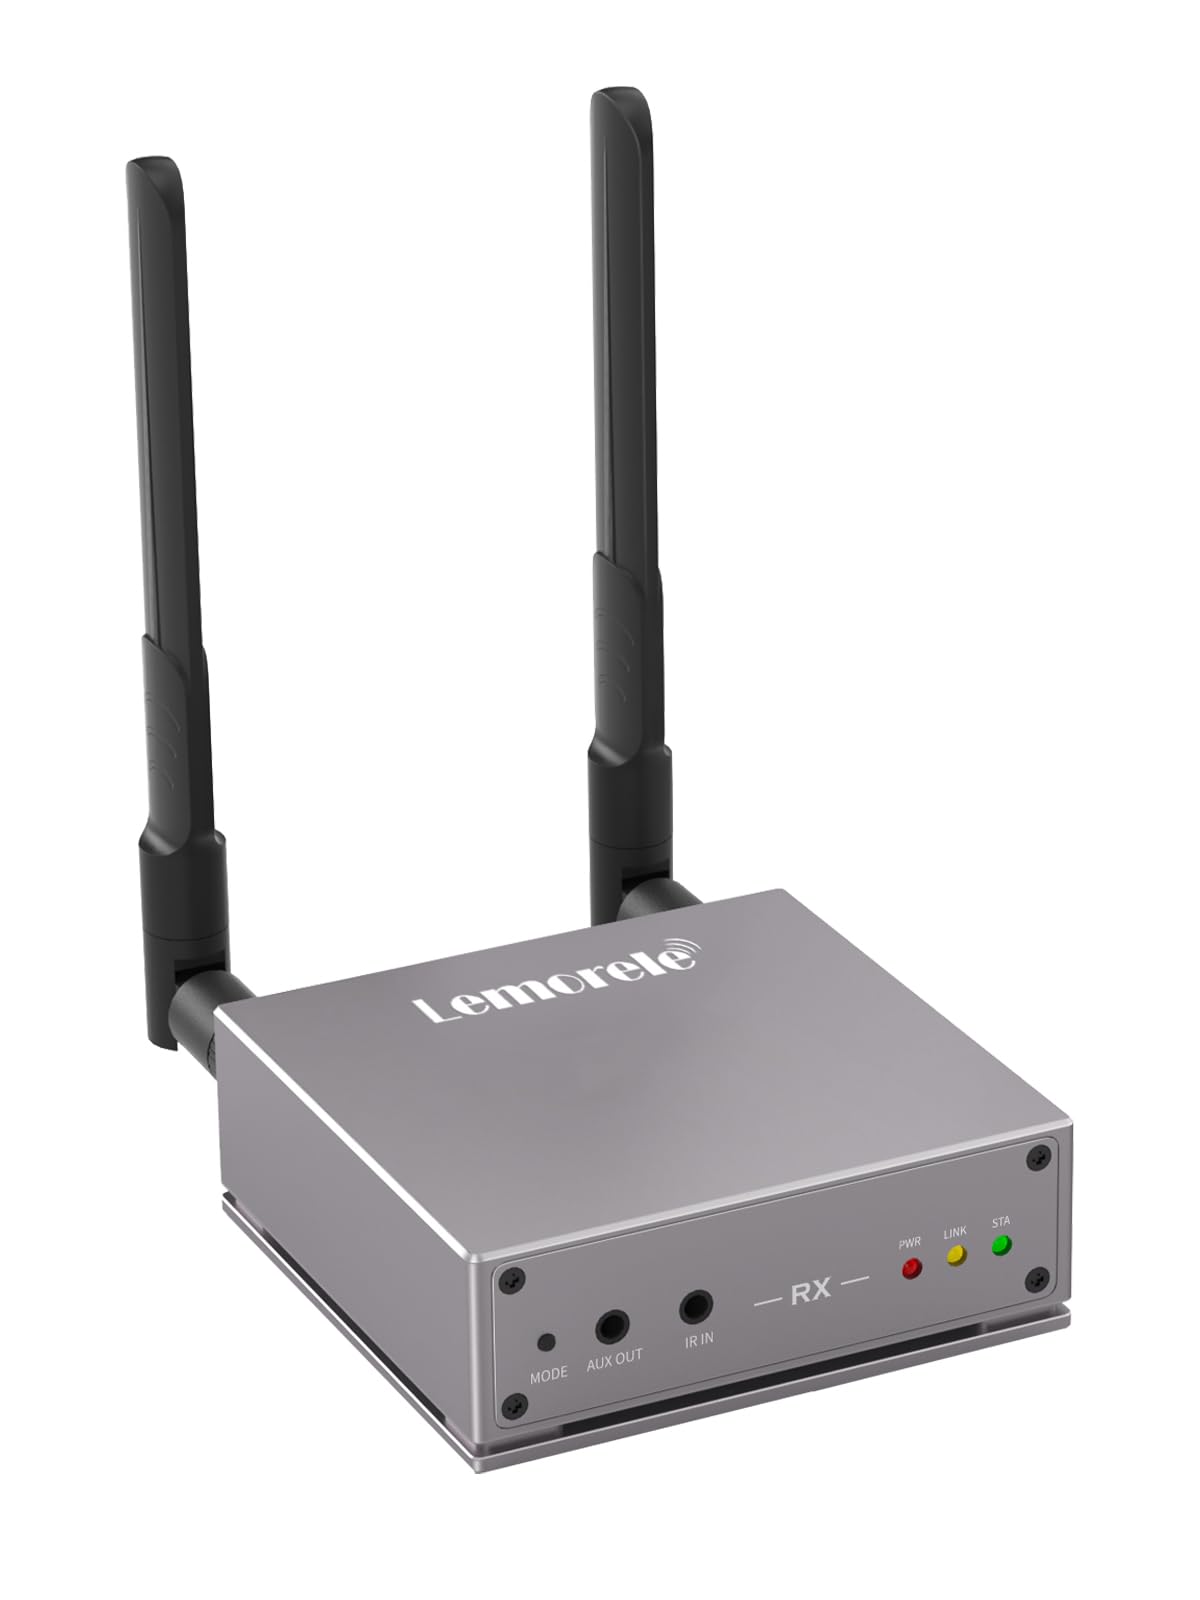 Lemorele Wireless HDMI Extender Kit Include Transmitter and 3 Receivers